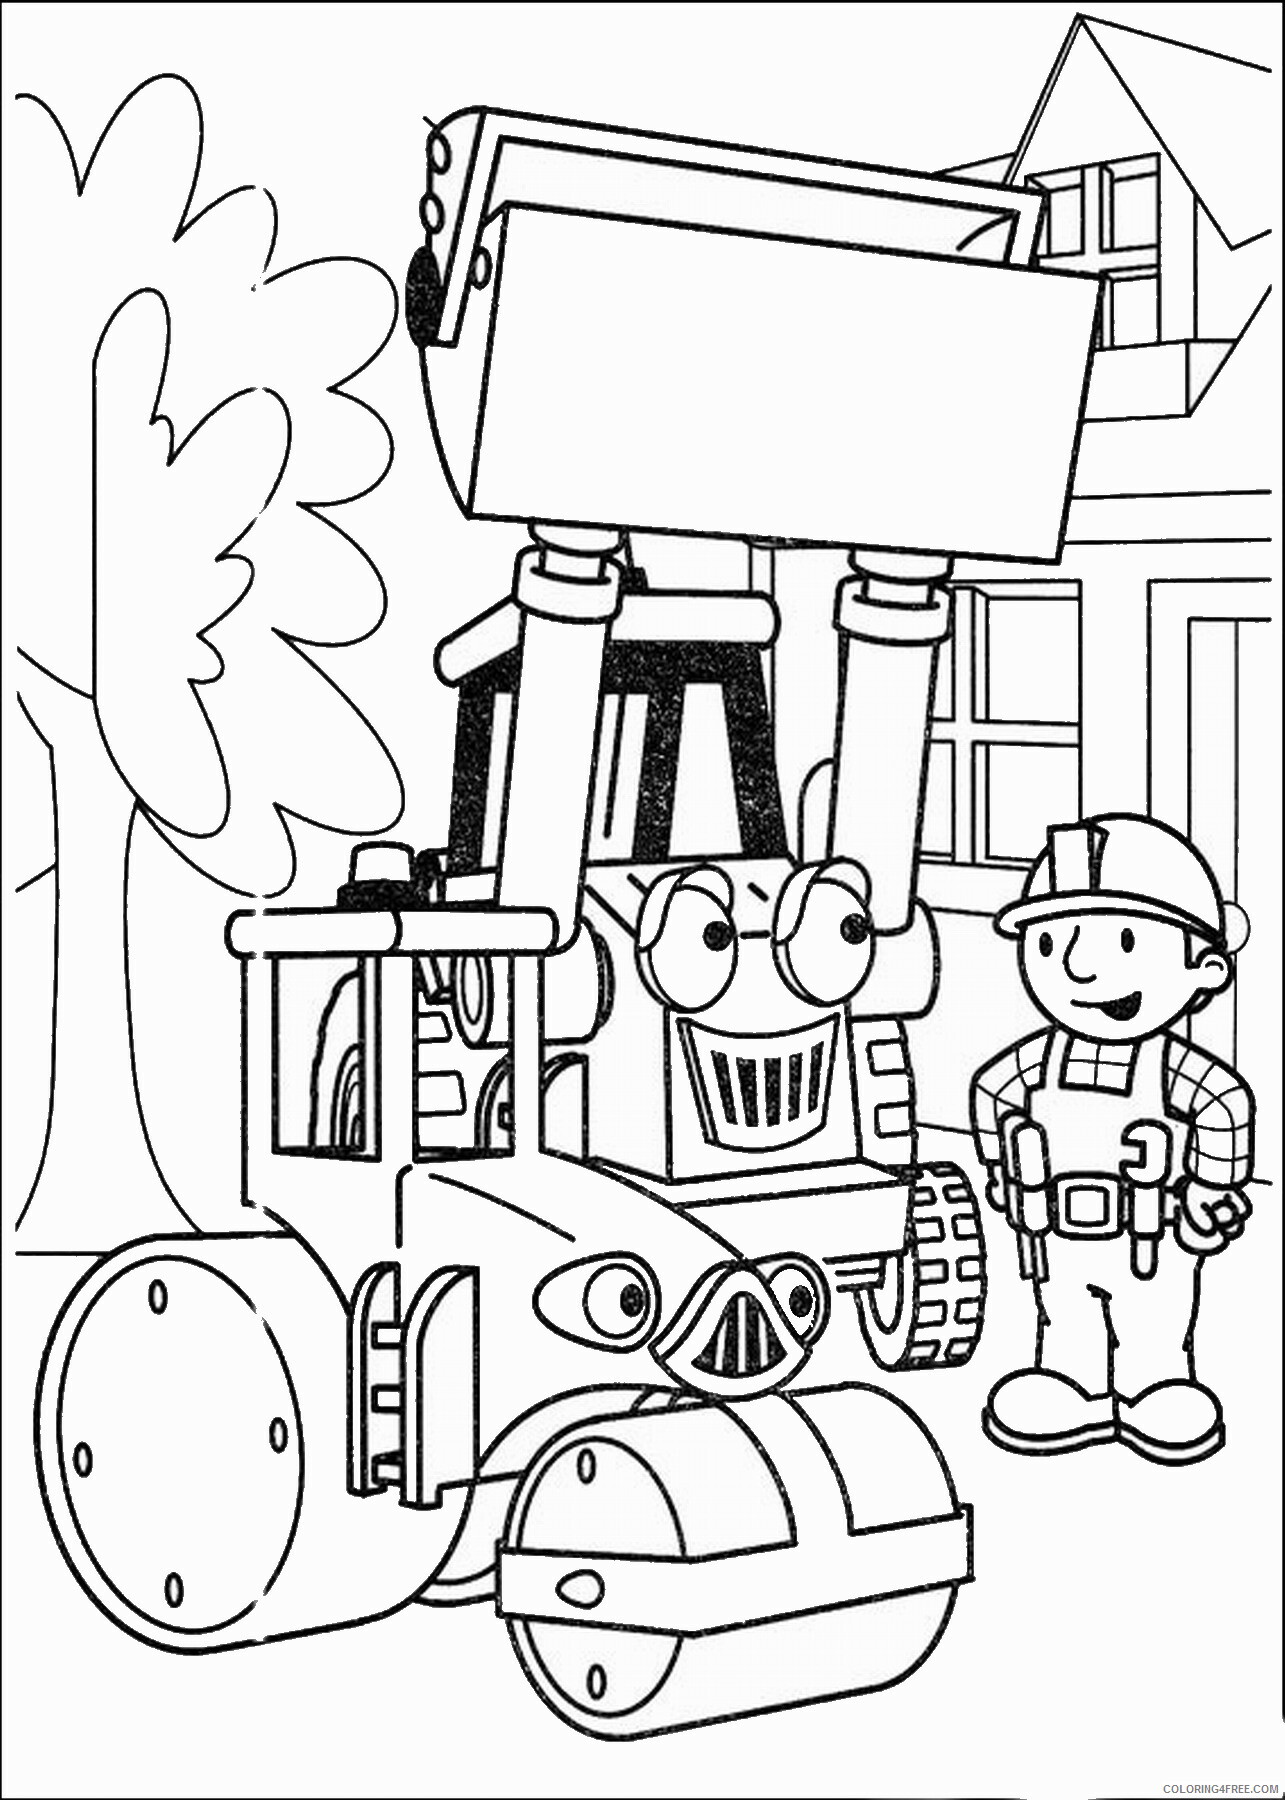 Bob the Builder Coloring Pages TV Film bob the builder_24 Printable 2020 00974 Coloring4free